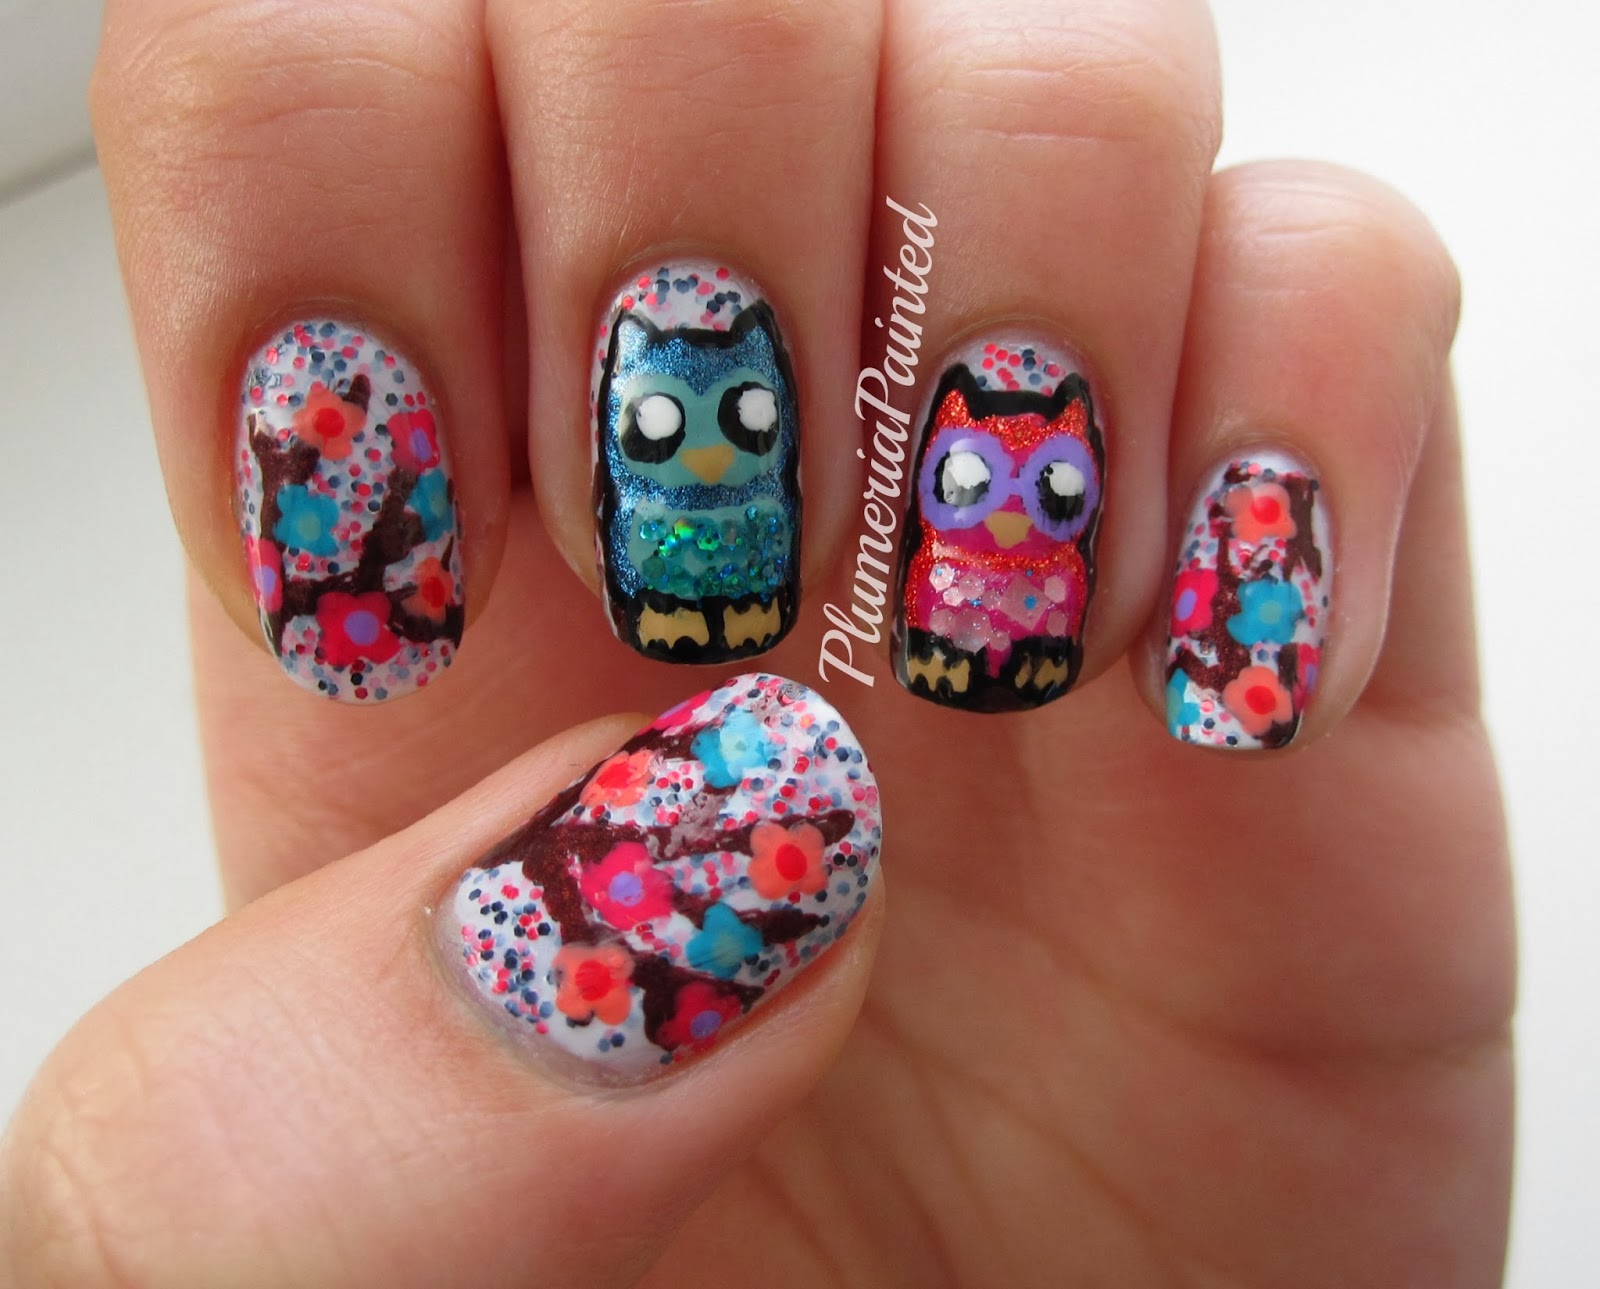 4. "Cute Owl Nail Designs for Autumn" - wide 6